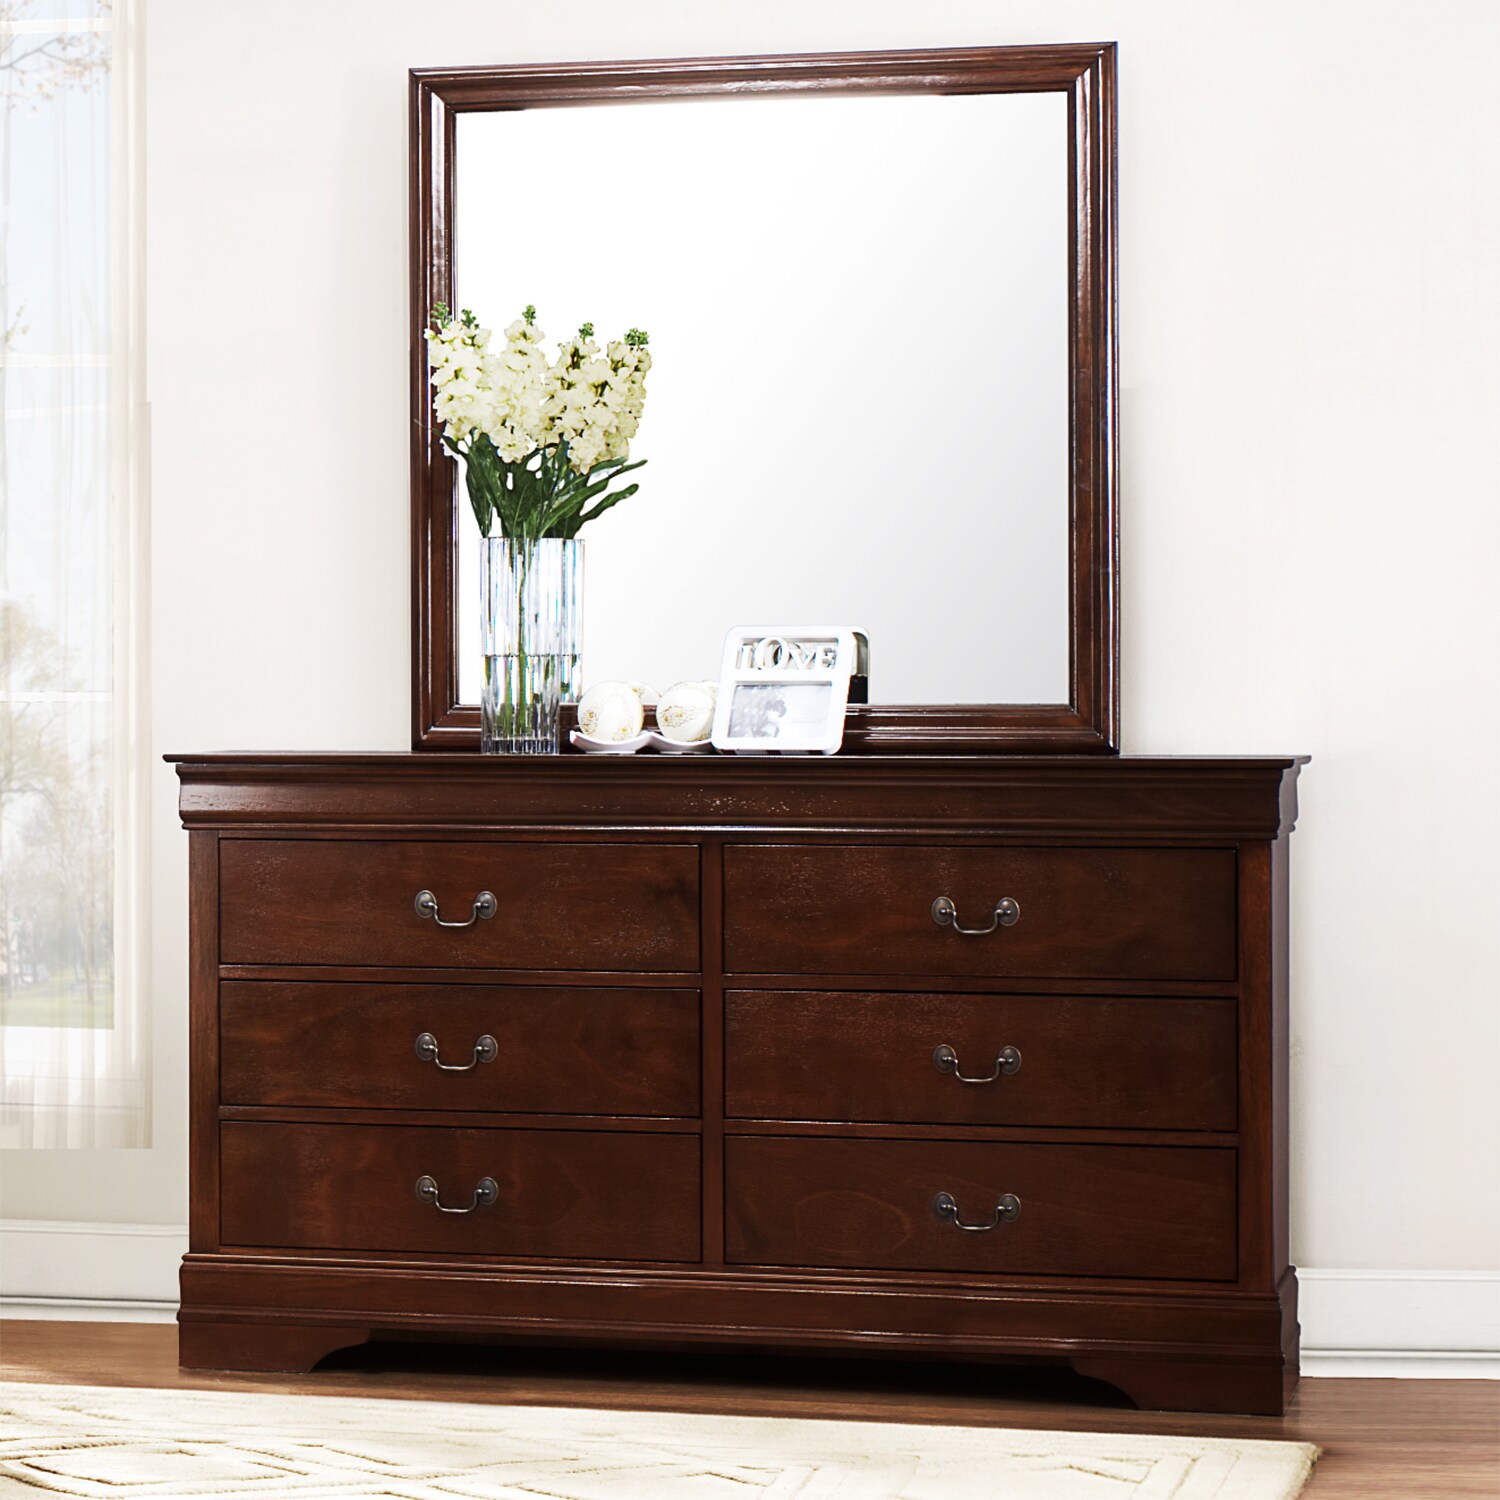 Tribecca Home Tribecca Home Milford Louis Phillip Brown Traditional 6 drawer Dresser And Mirror Brown Size 6 drawer